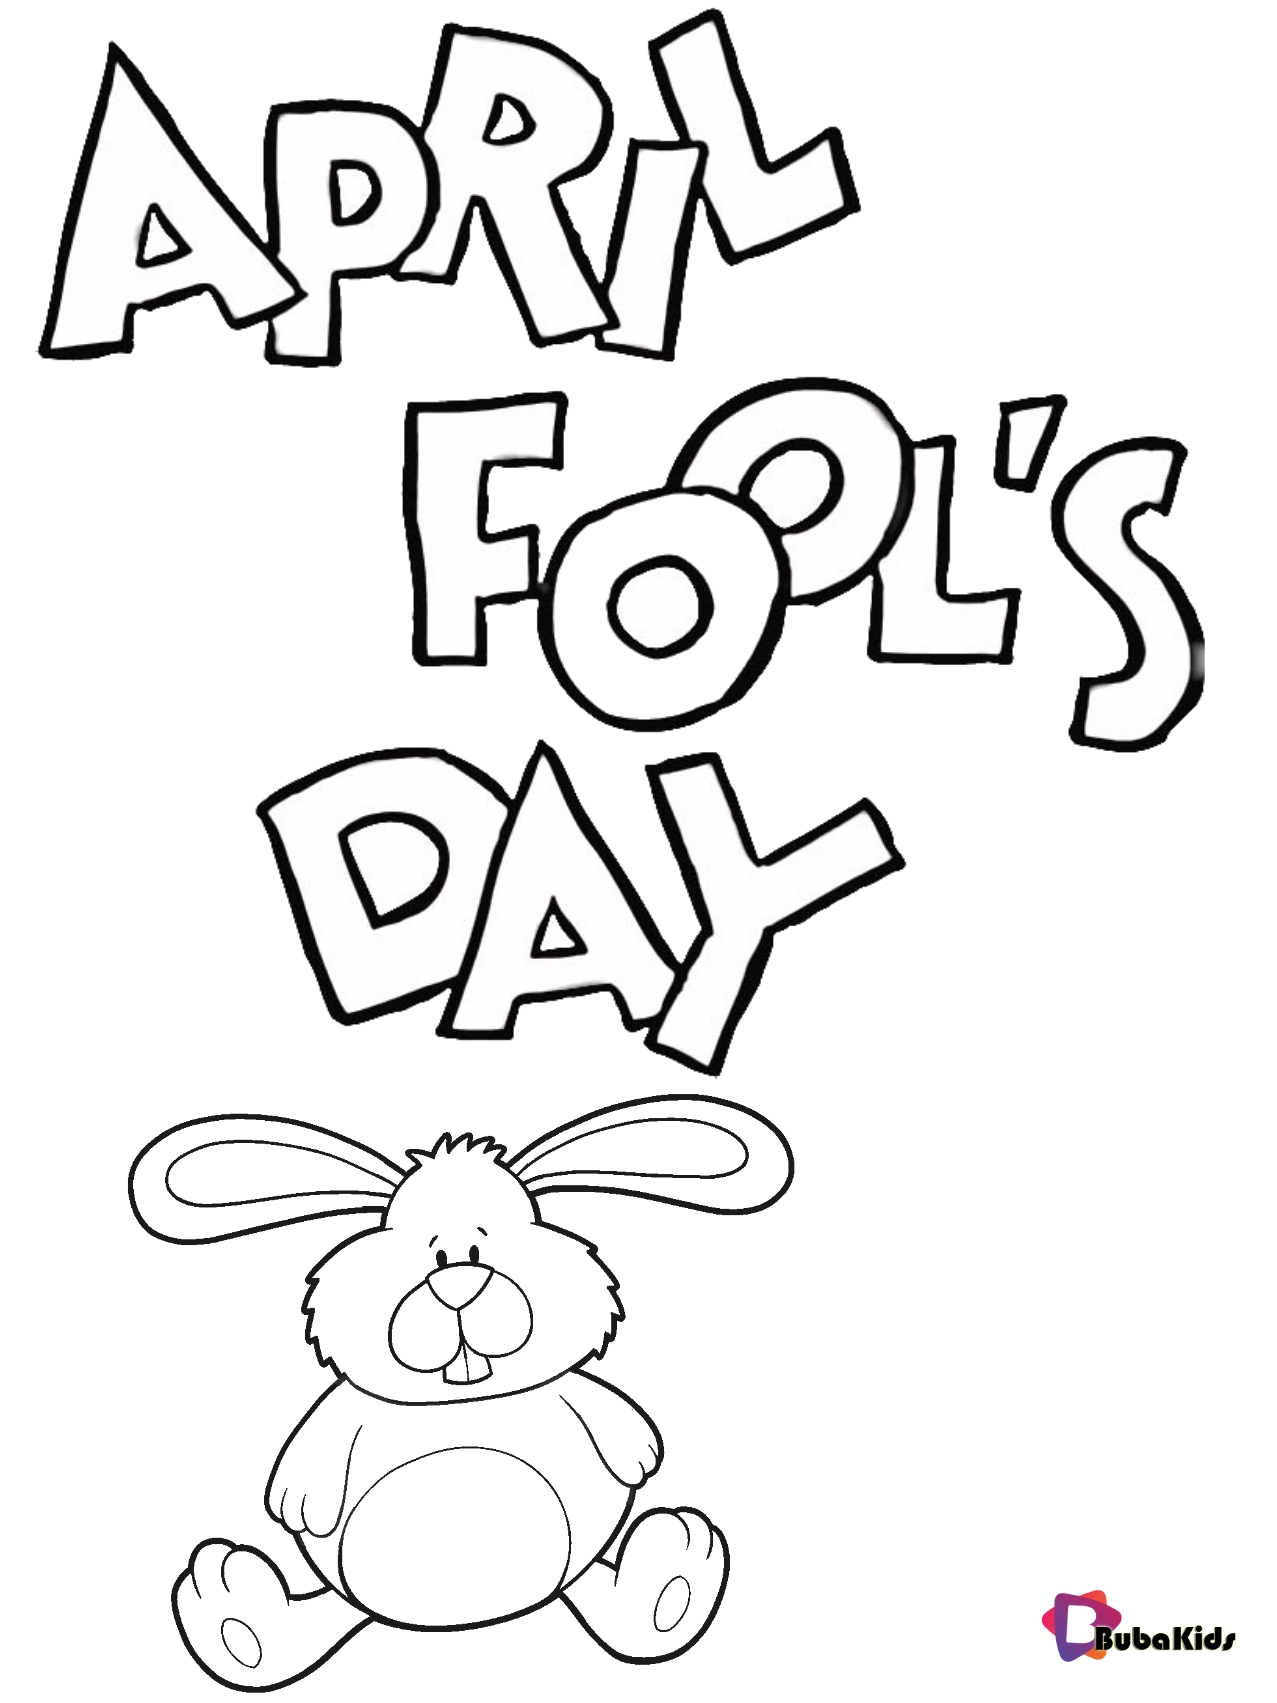 April fools day bunny coloring pages